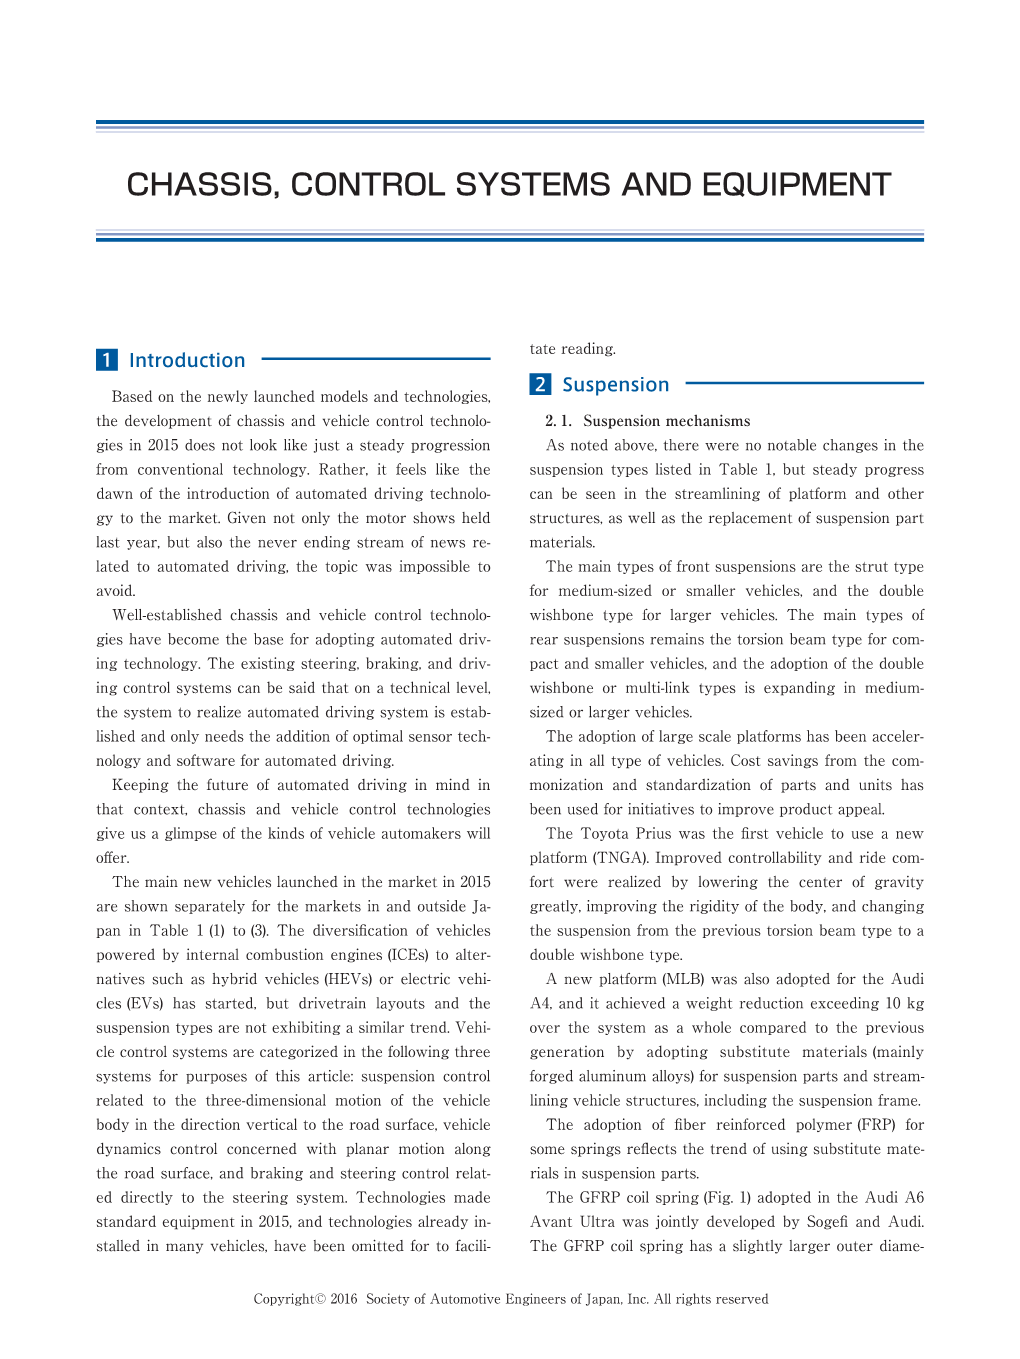 Chassis, Control Systems and Equipment